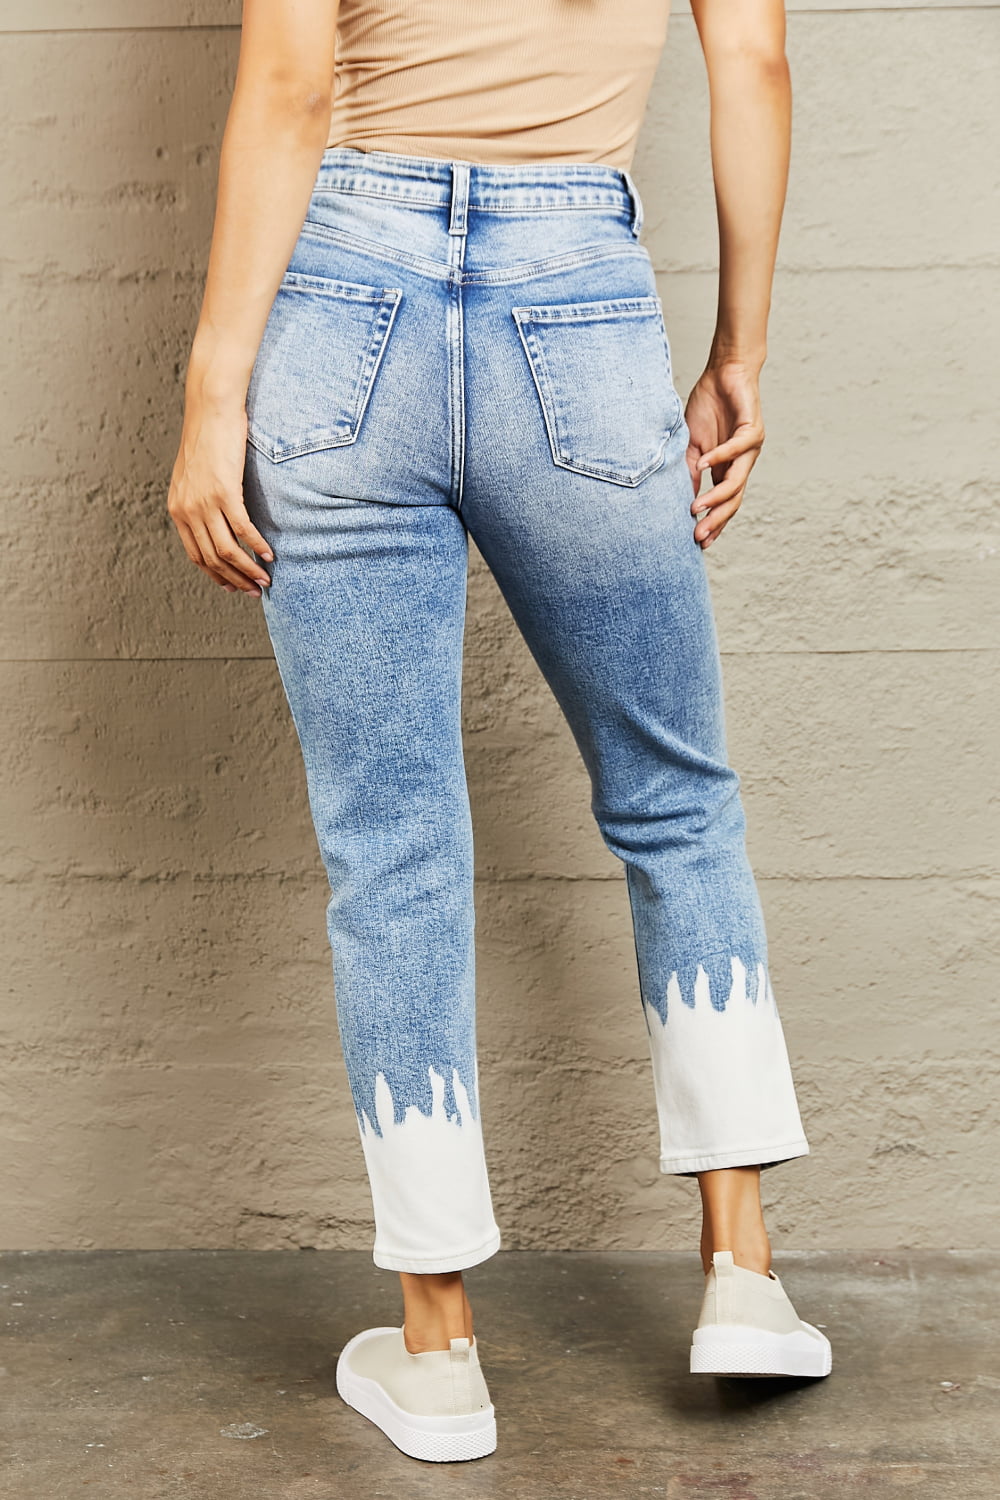 These jeans are the perfect blend of fashion and comfort, featuring a flattering high waist design that accentuates your curves while providing a comfortable fit. The medium wash adds a touch of vintage charm, while the distressed detailing gives them a chic and edgy look. 